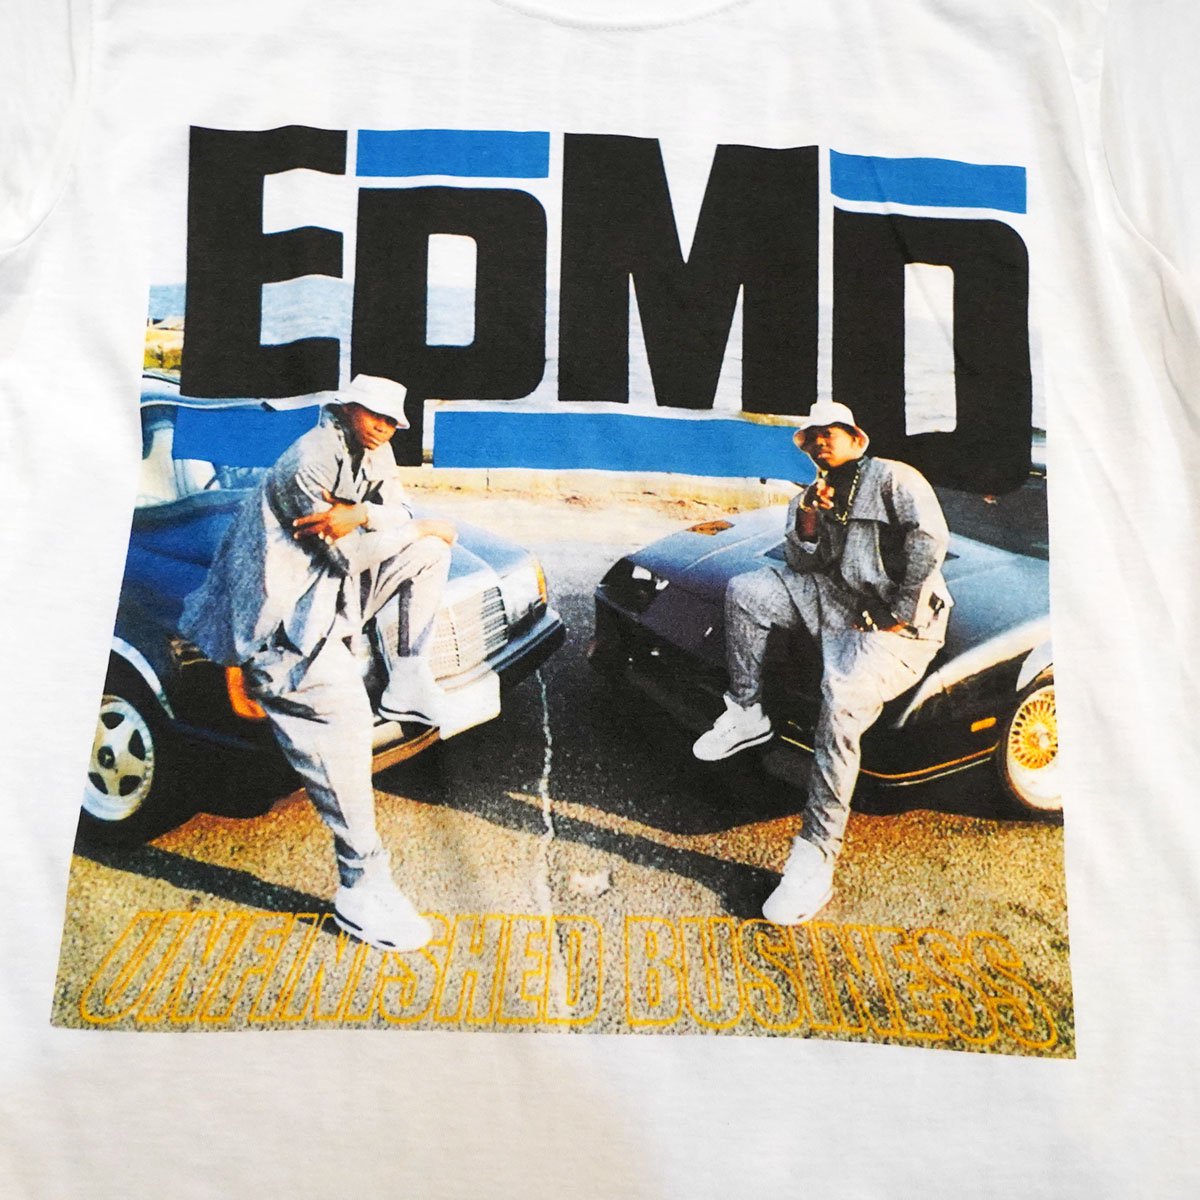 Fedup | HIPHOP WEAR | <img class='new_mark_img1' src='https://img.shop-pro.jp/img/new/icons30.gif' style='border:none;display:inline;margin:0px;padding:0px;width:auto;' />EPMD 